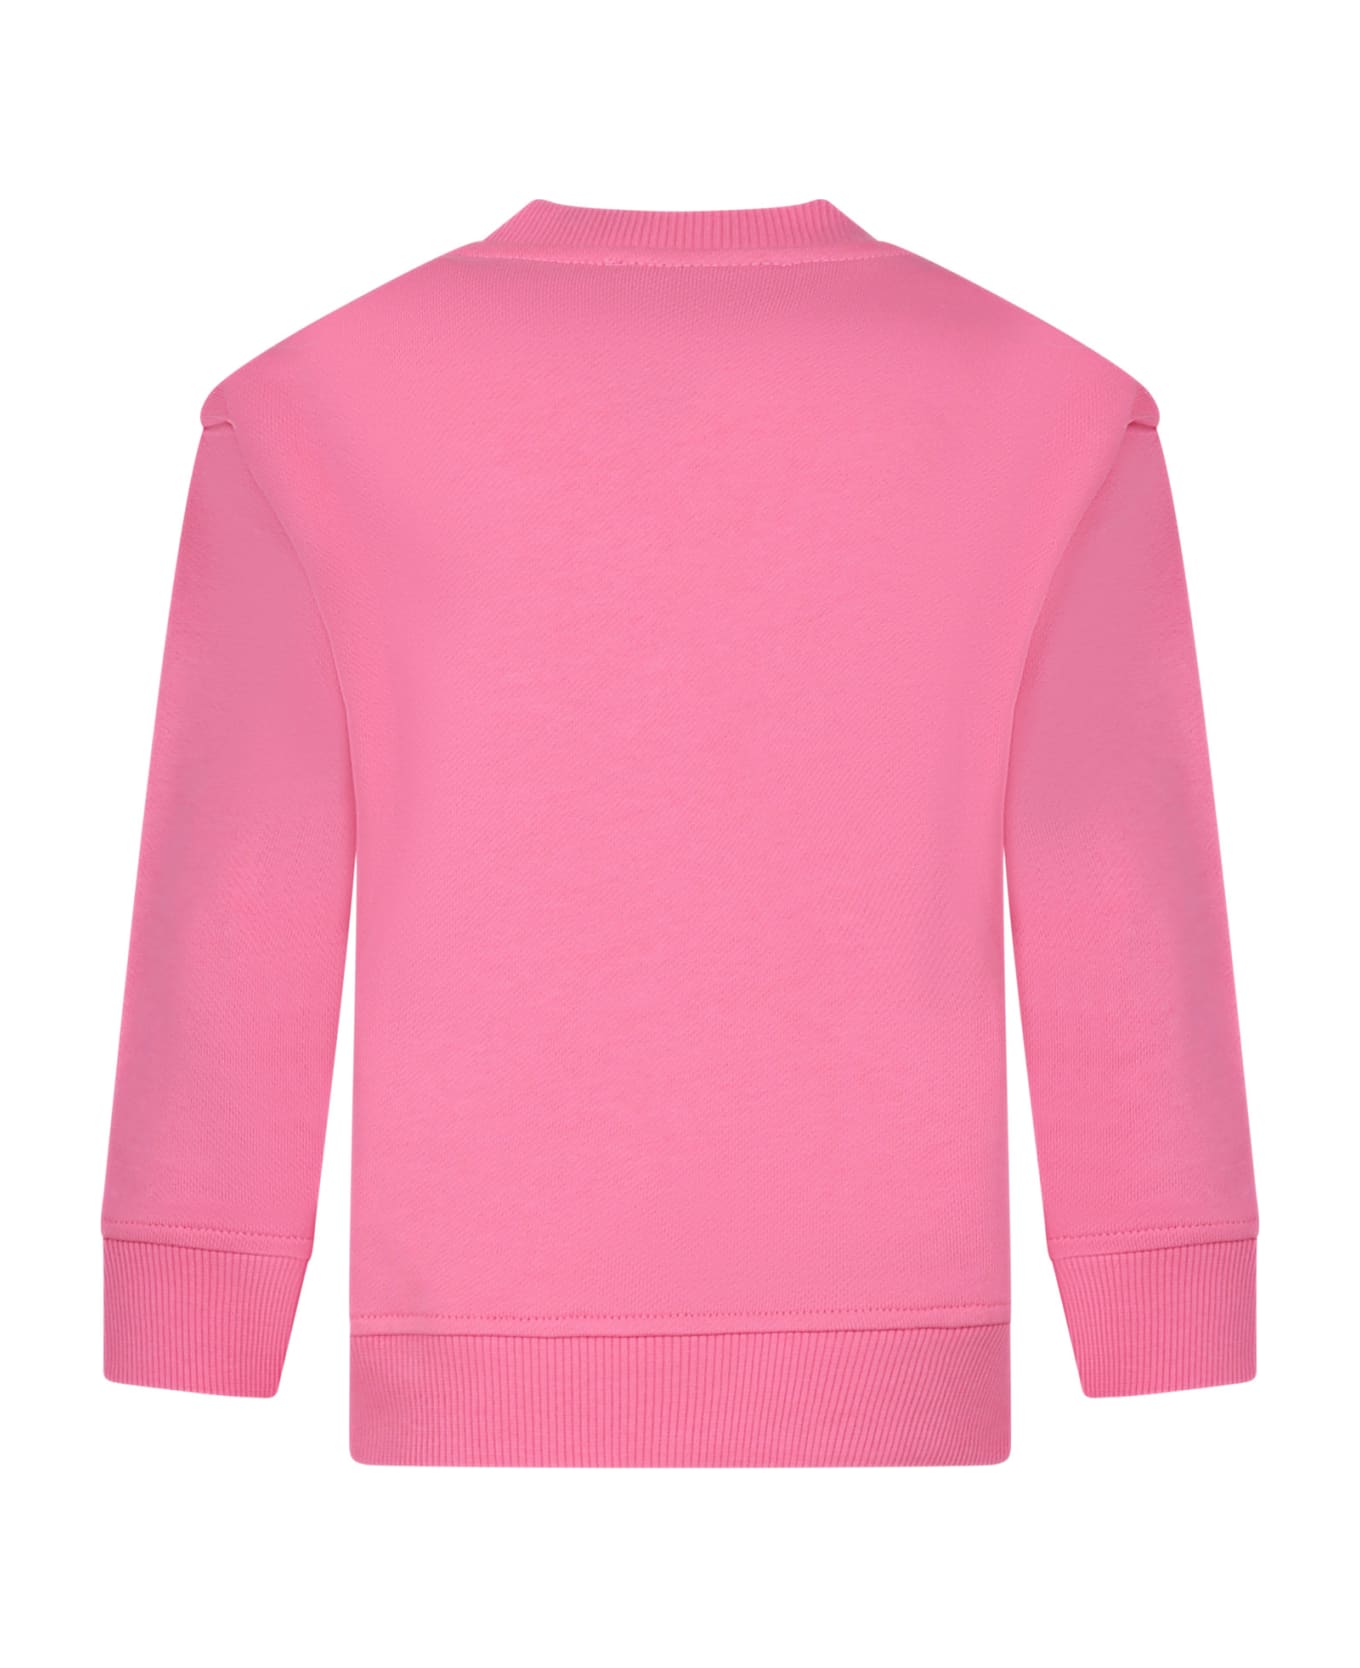 Emporio Armani Pink Sweatshirt For Girl With The Smurfs - Pink